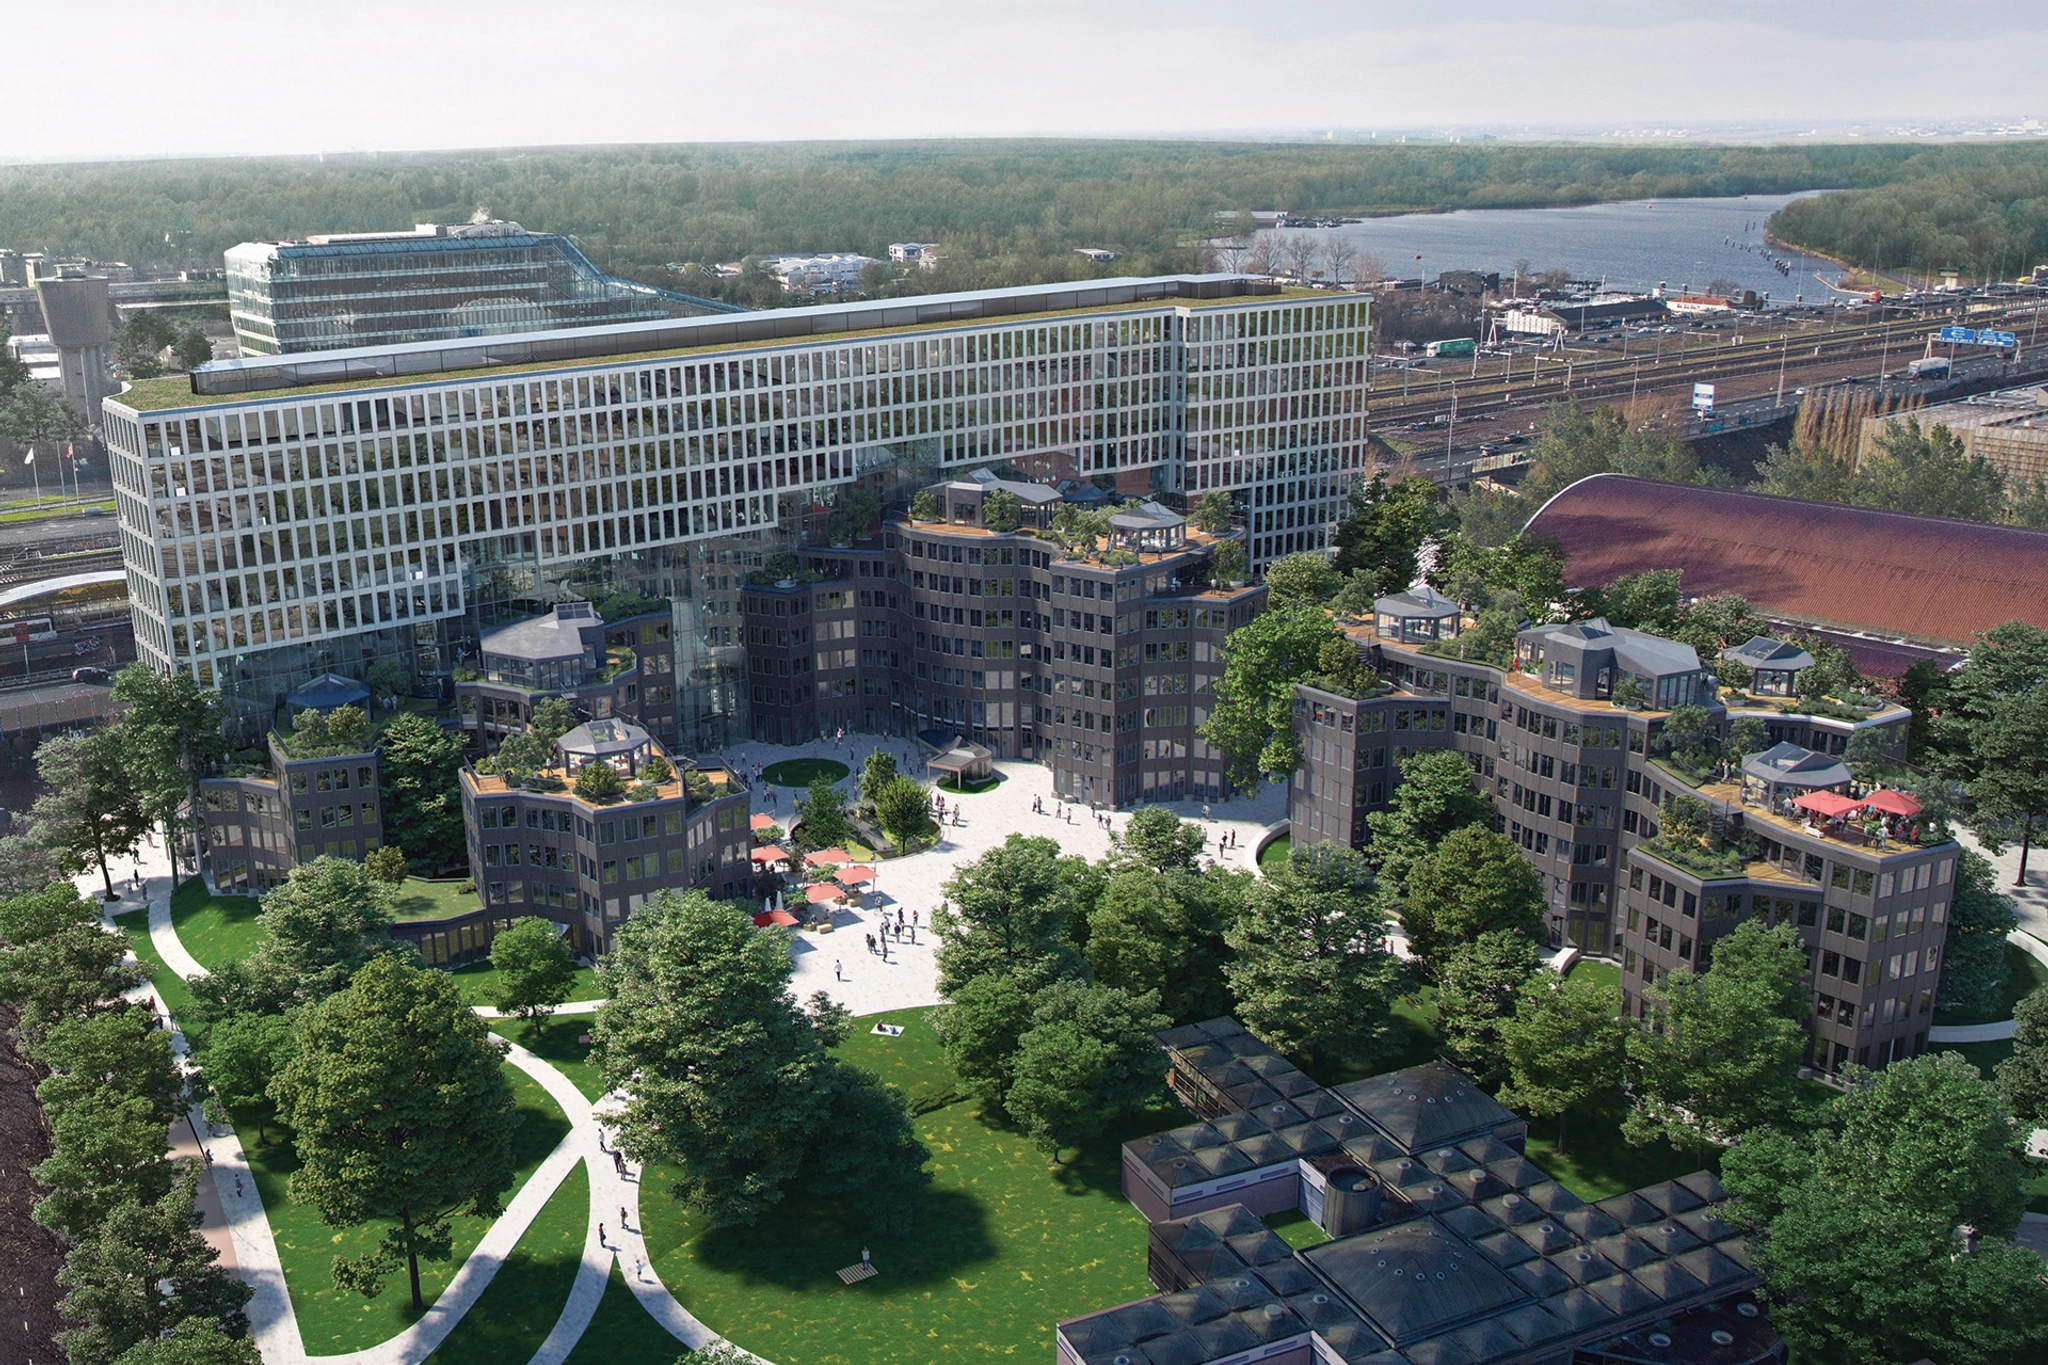 An aerial view of an office building in Amsterdam, surrounded by trees.